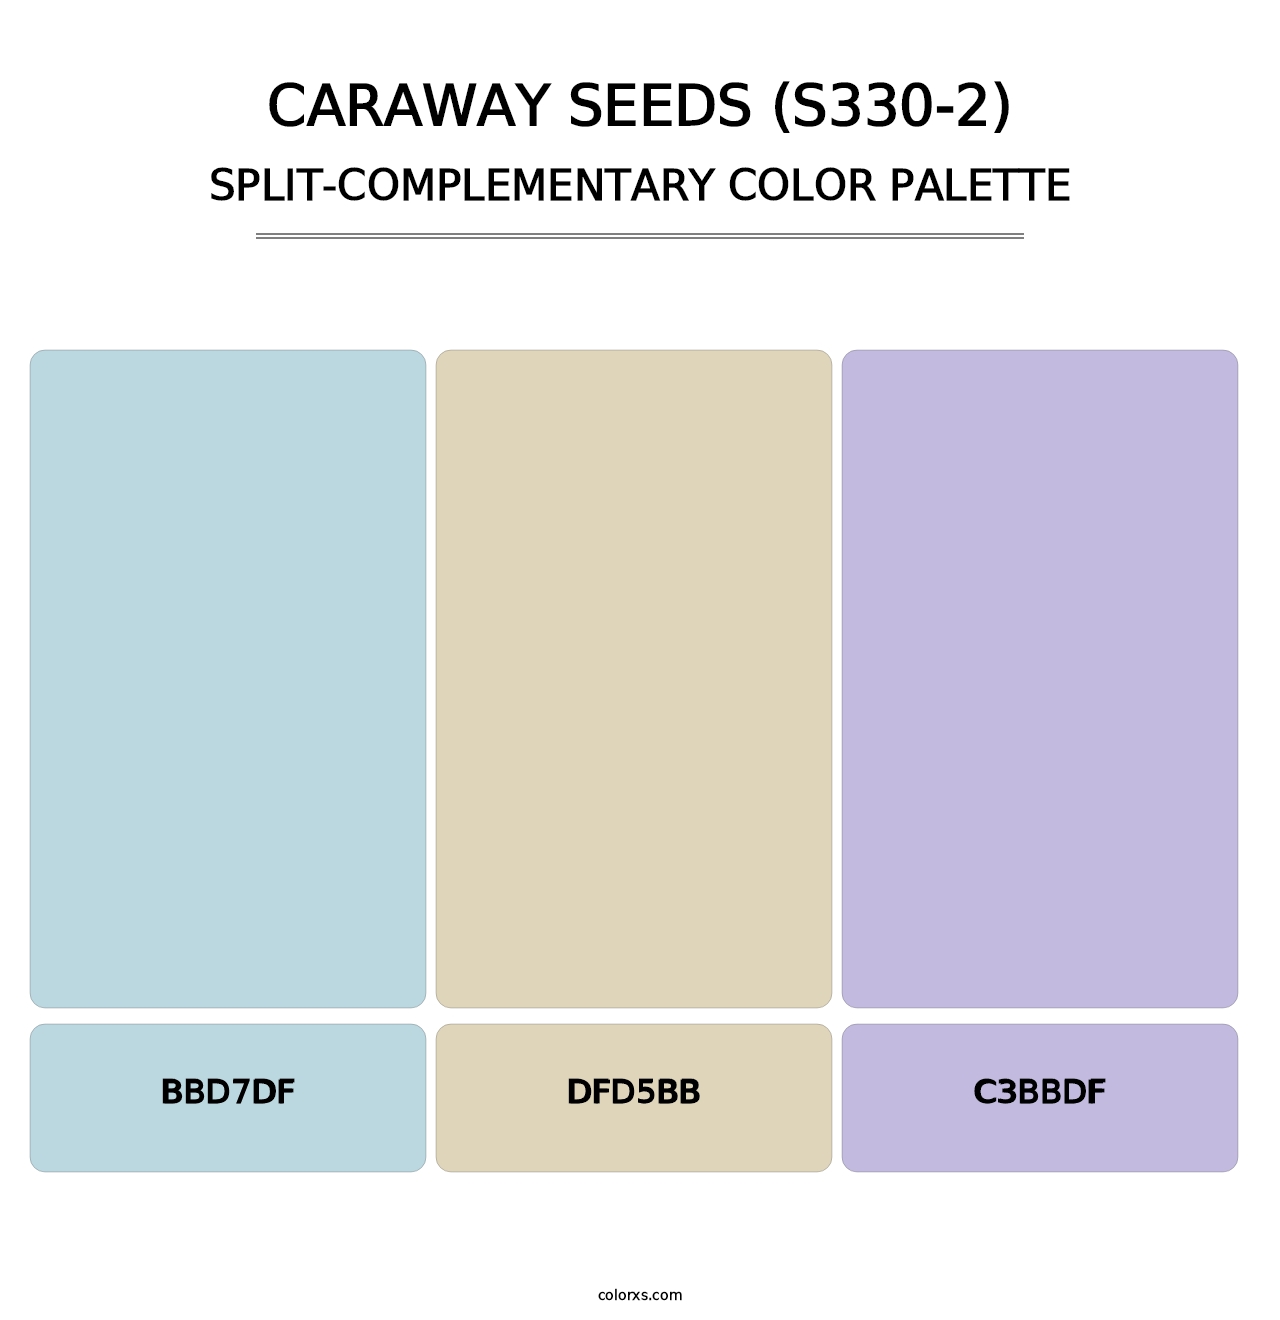 Caraway Seeds (S330-2) - Split-Complementary Color Palette